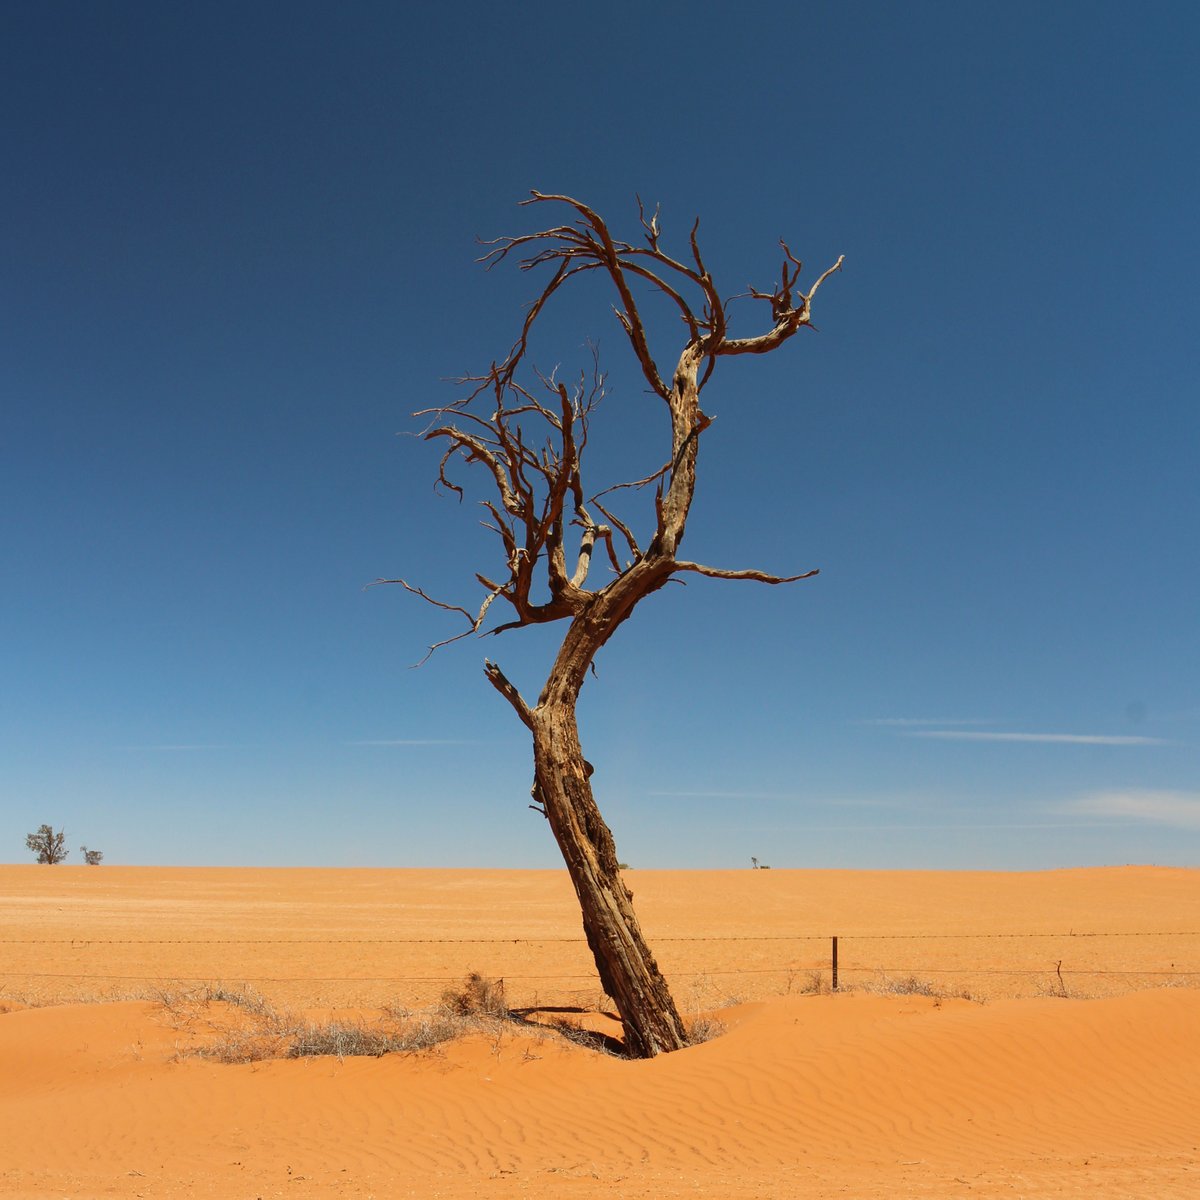 This tree looks like a skeletal hand reaching out of the red sand.
Between Renmark and Mildura in December 2019 (during a drought).